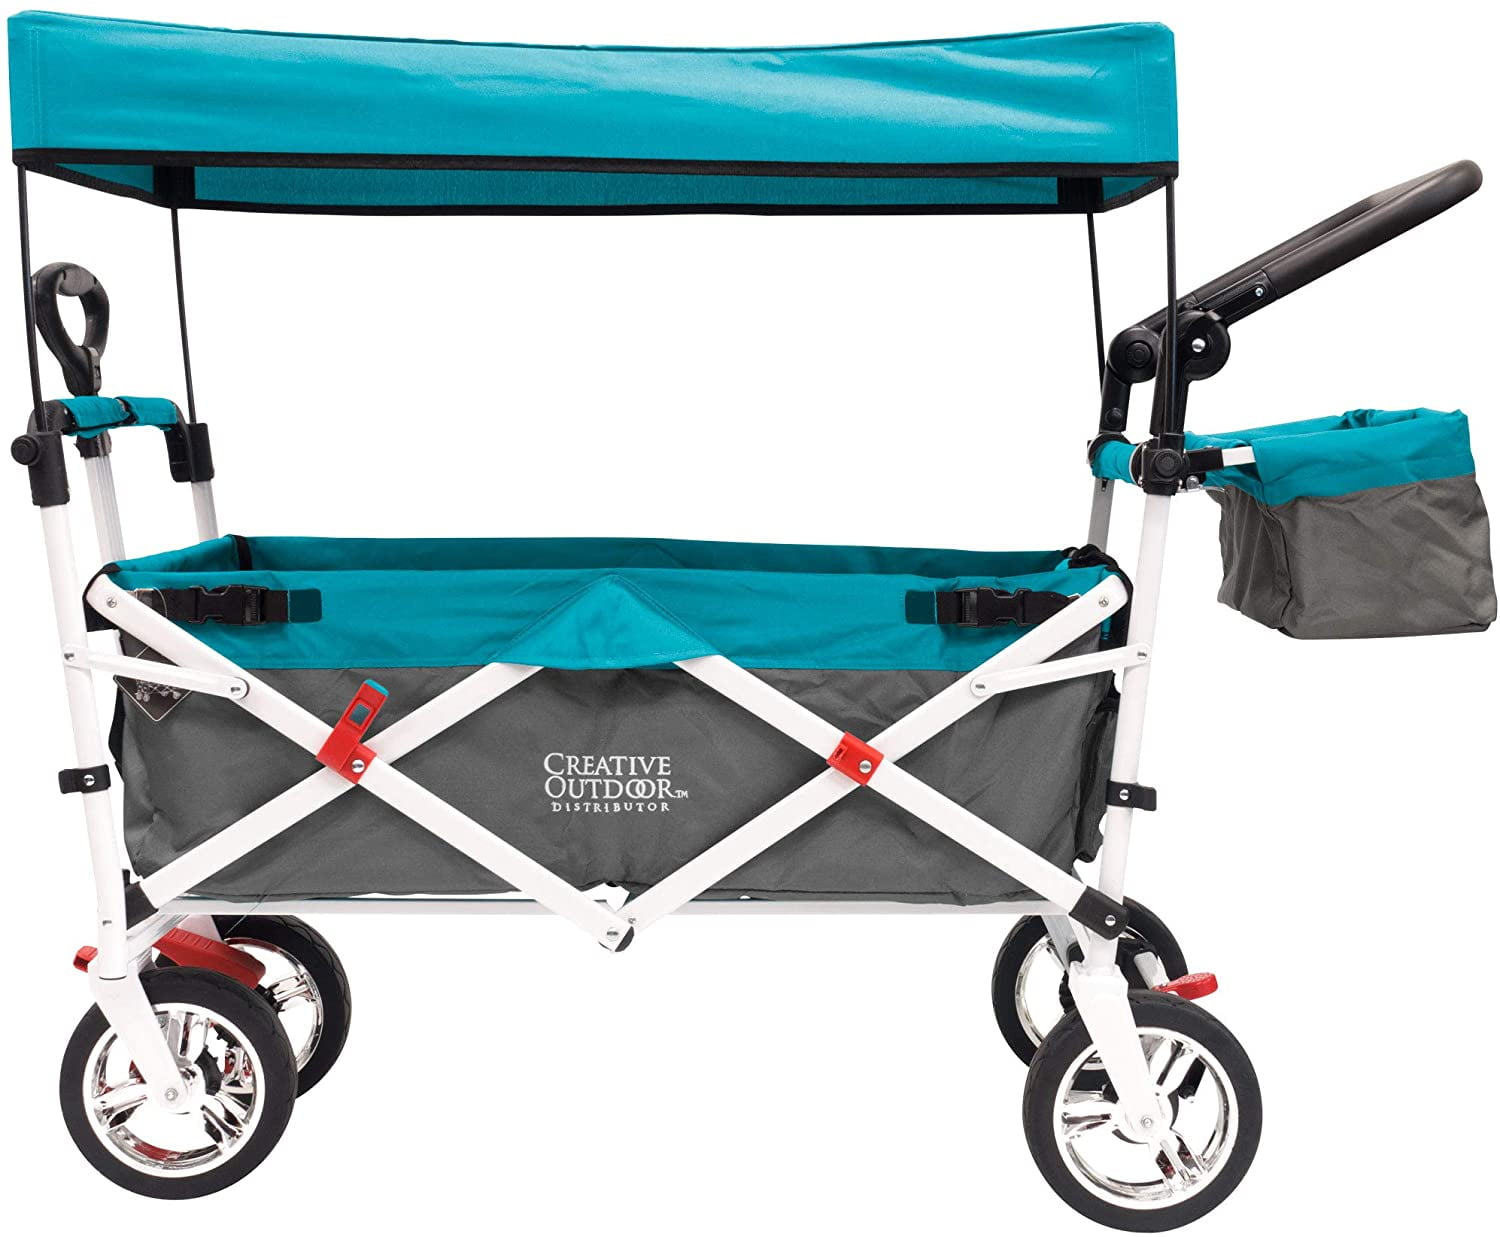 Creative Outdoor Push Pull Collapsible Folding Wagon Stroller Cart for Kids | Silver Series Plus | Beach Park Garden & Tailgate (Teal)